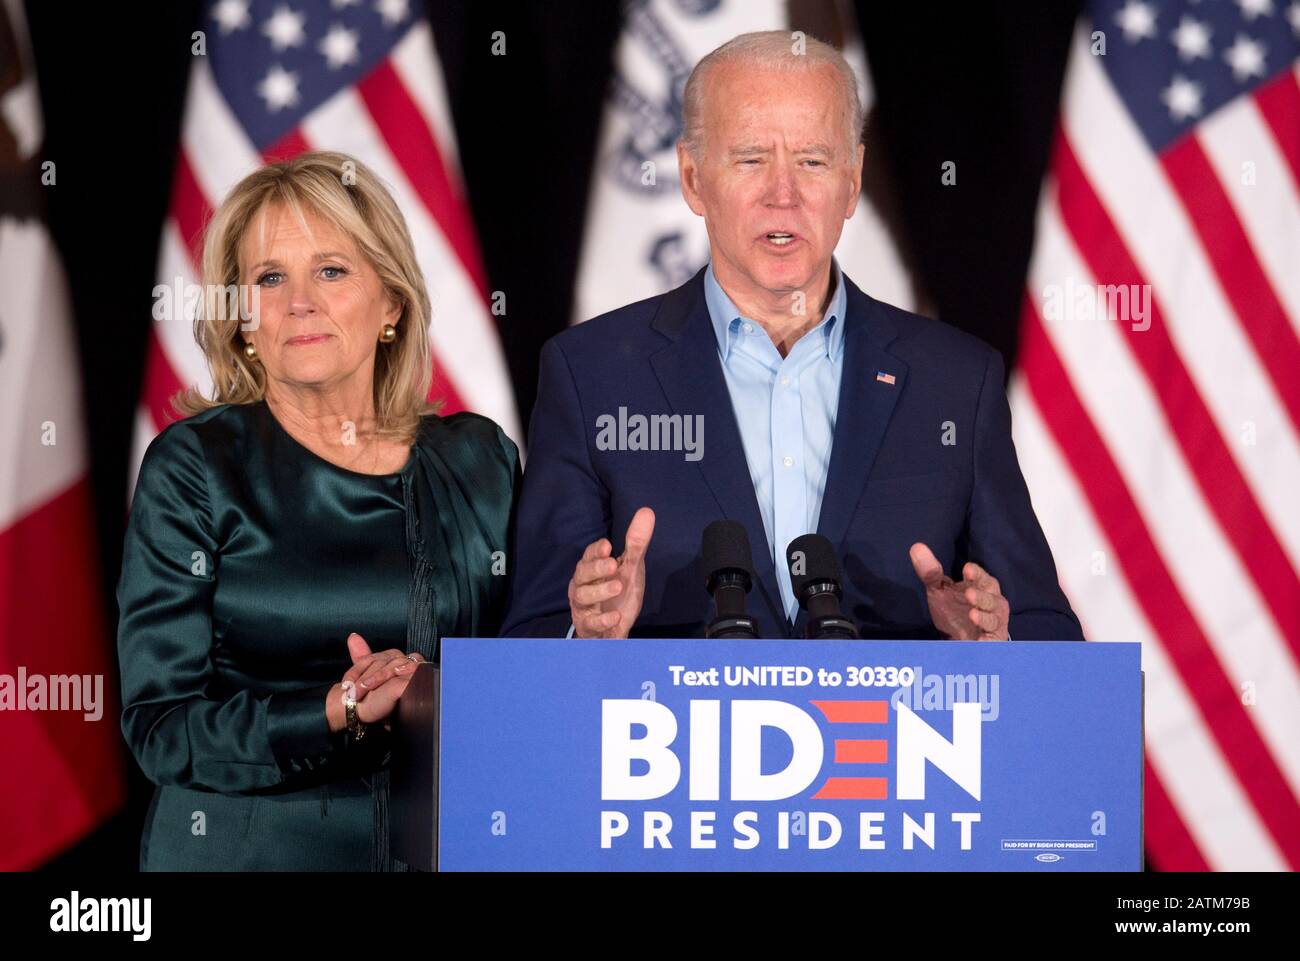 Des Moines, Iowa, USA. 03rd Feb, 2020. With Dr. JILL BIDEN at his side, former Vice President and Democratic presidential candidate JOE BIDEN speaks at Drake University. Finals results from the Iowa caucuses were delayed and not released at the time of his remarks. Credit: Brian Cahn/ZUMA Wire/Alamy Live News Stock Photo